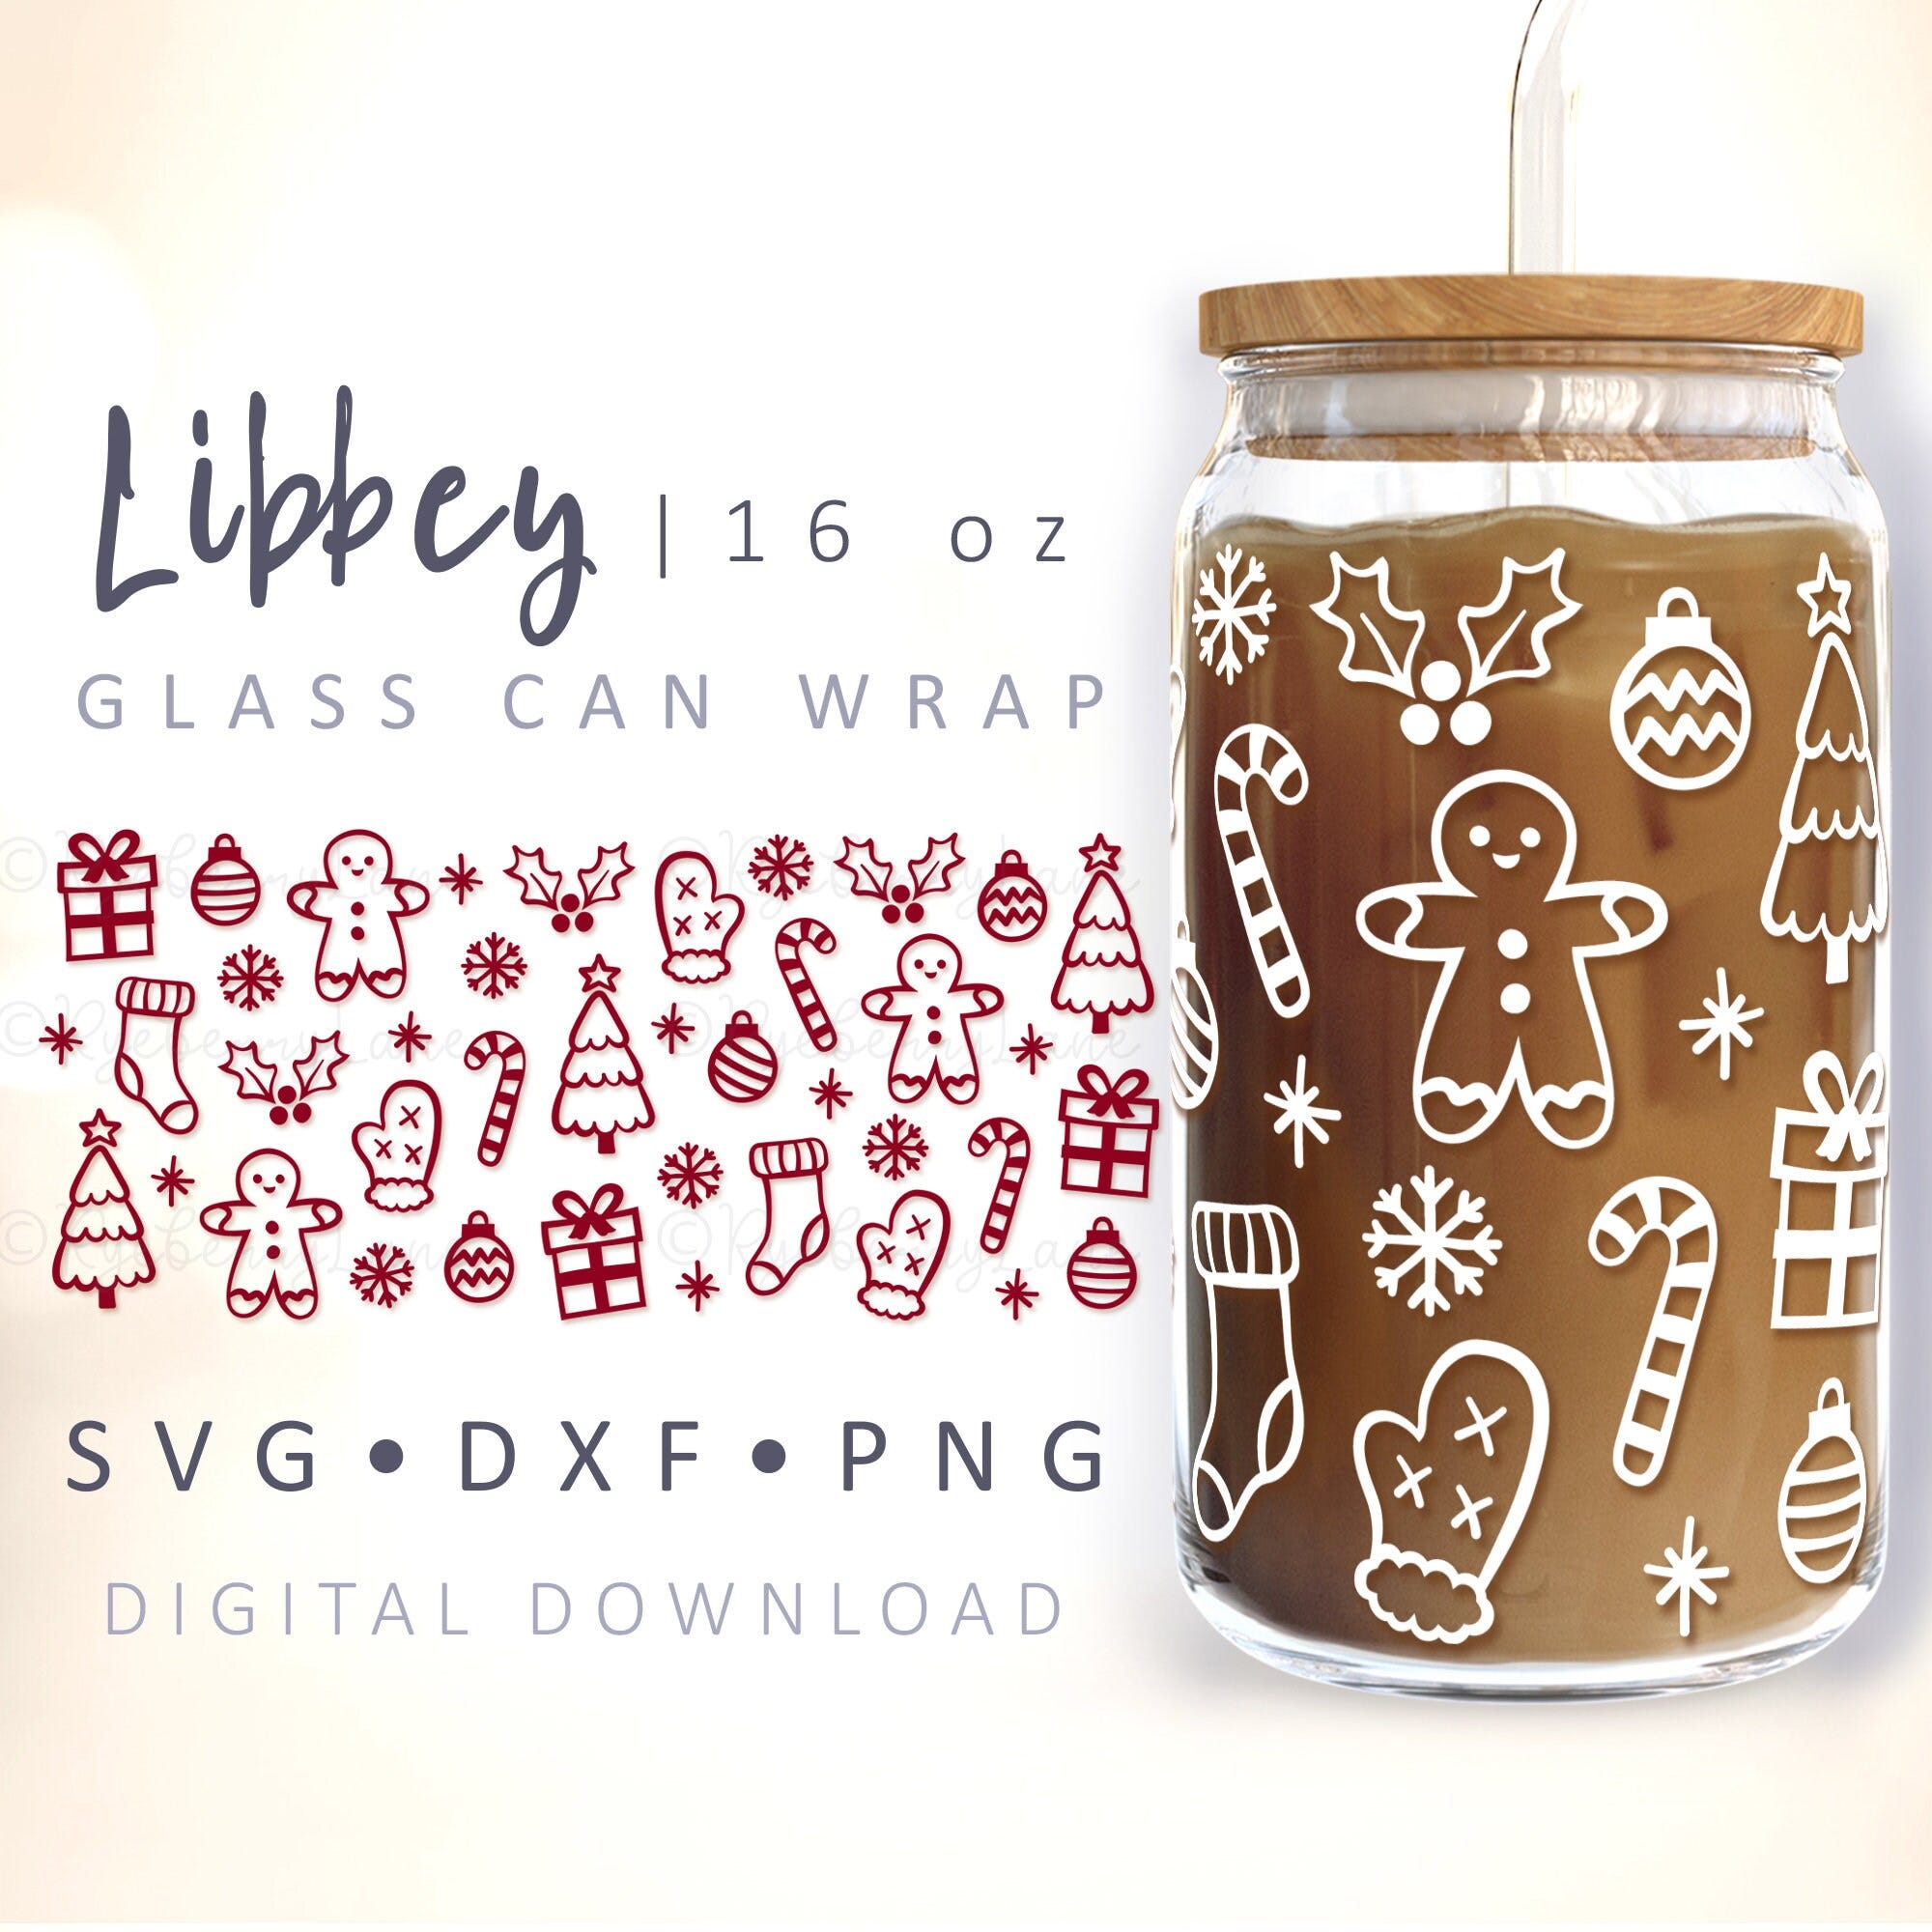 Christmas Can Glass Wrap SVG Gingerbread Glass Stockings Snowflakes Holly Candy Canes Minimalist Trees Hand Drawn 16 oz Libbey Wrap Cut File